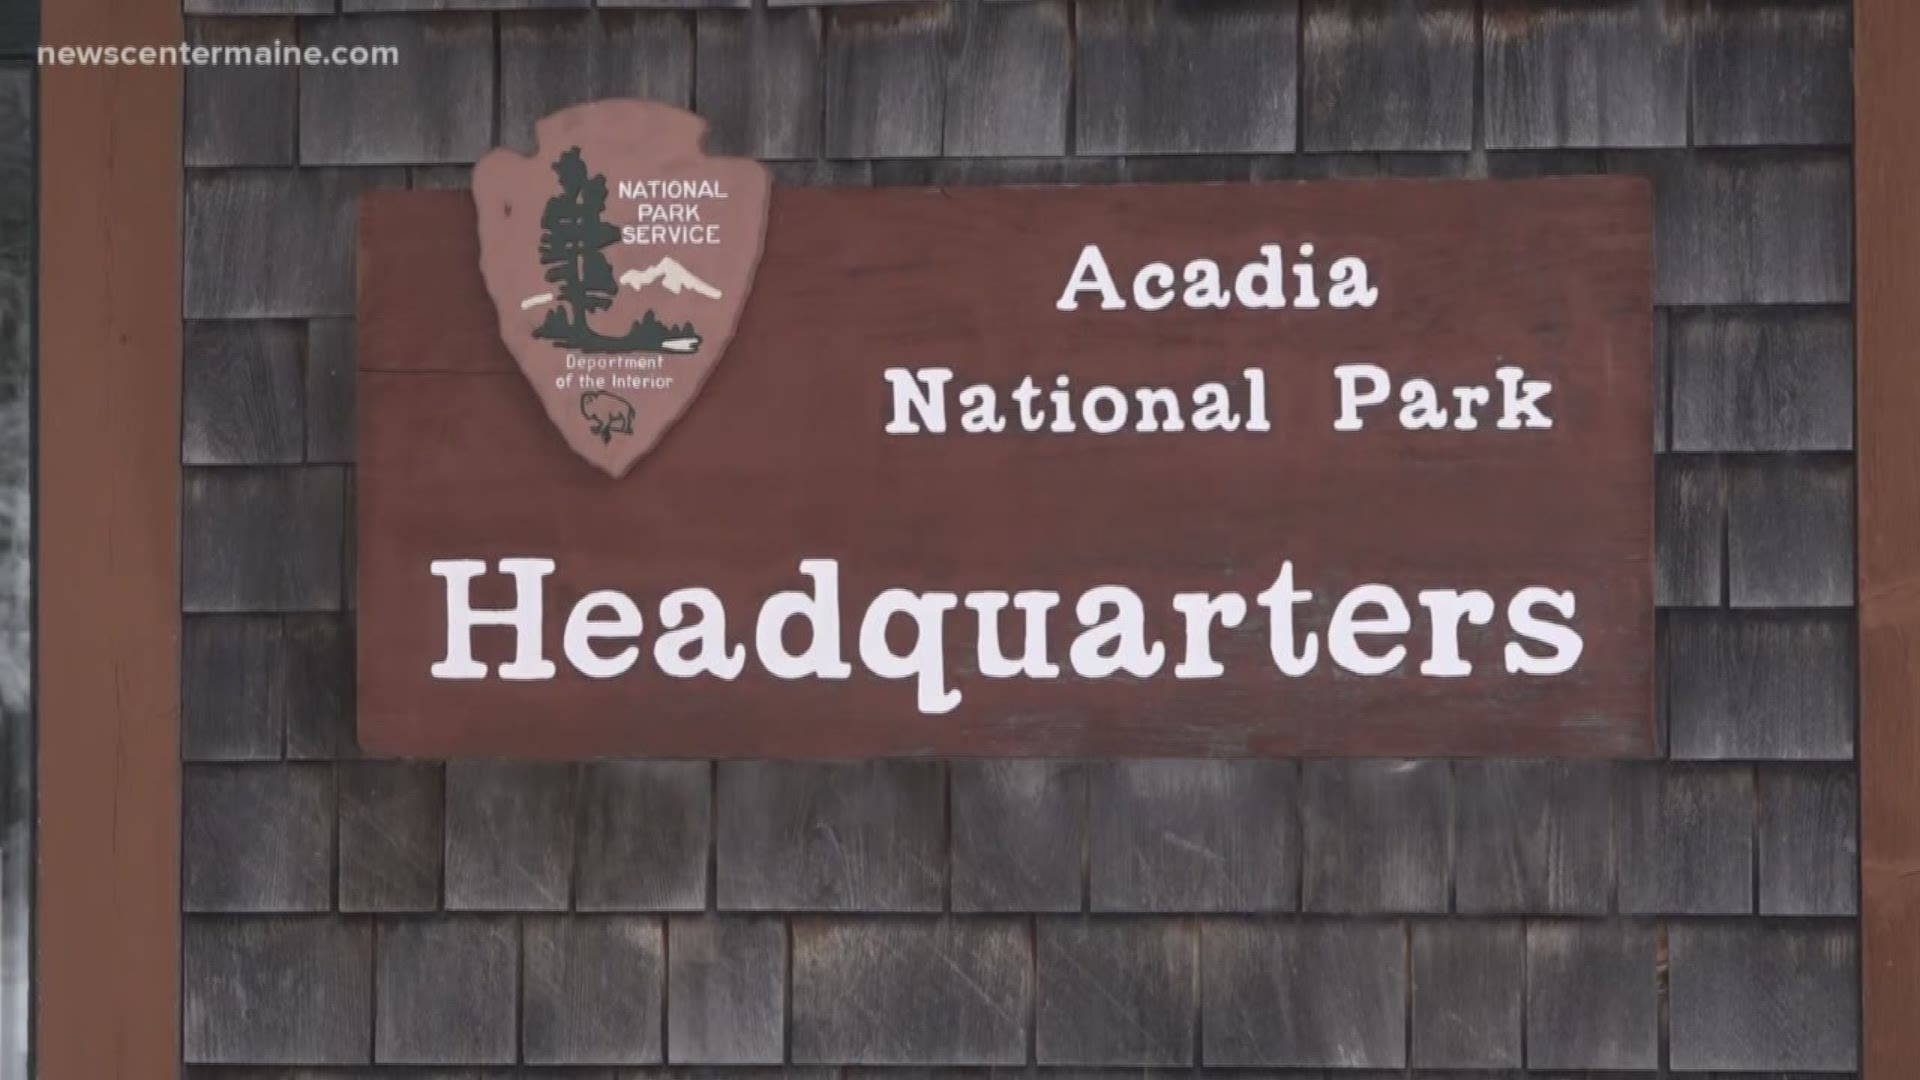 Acadia National Park puts long-term projects on the back burner in order to make up for time lost during the federal government shutdown.